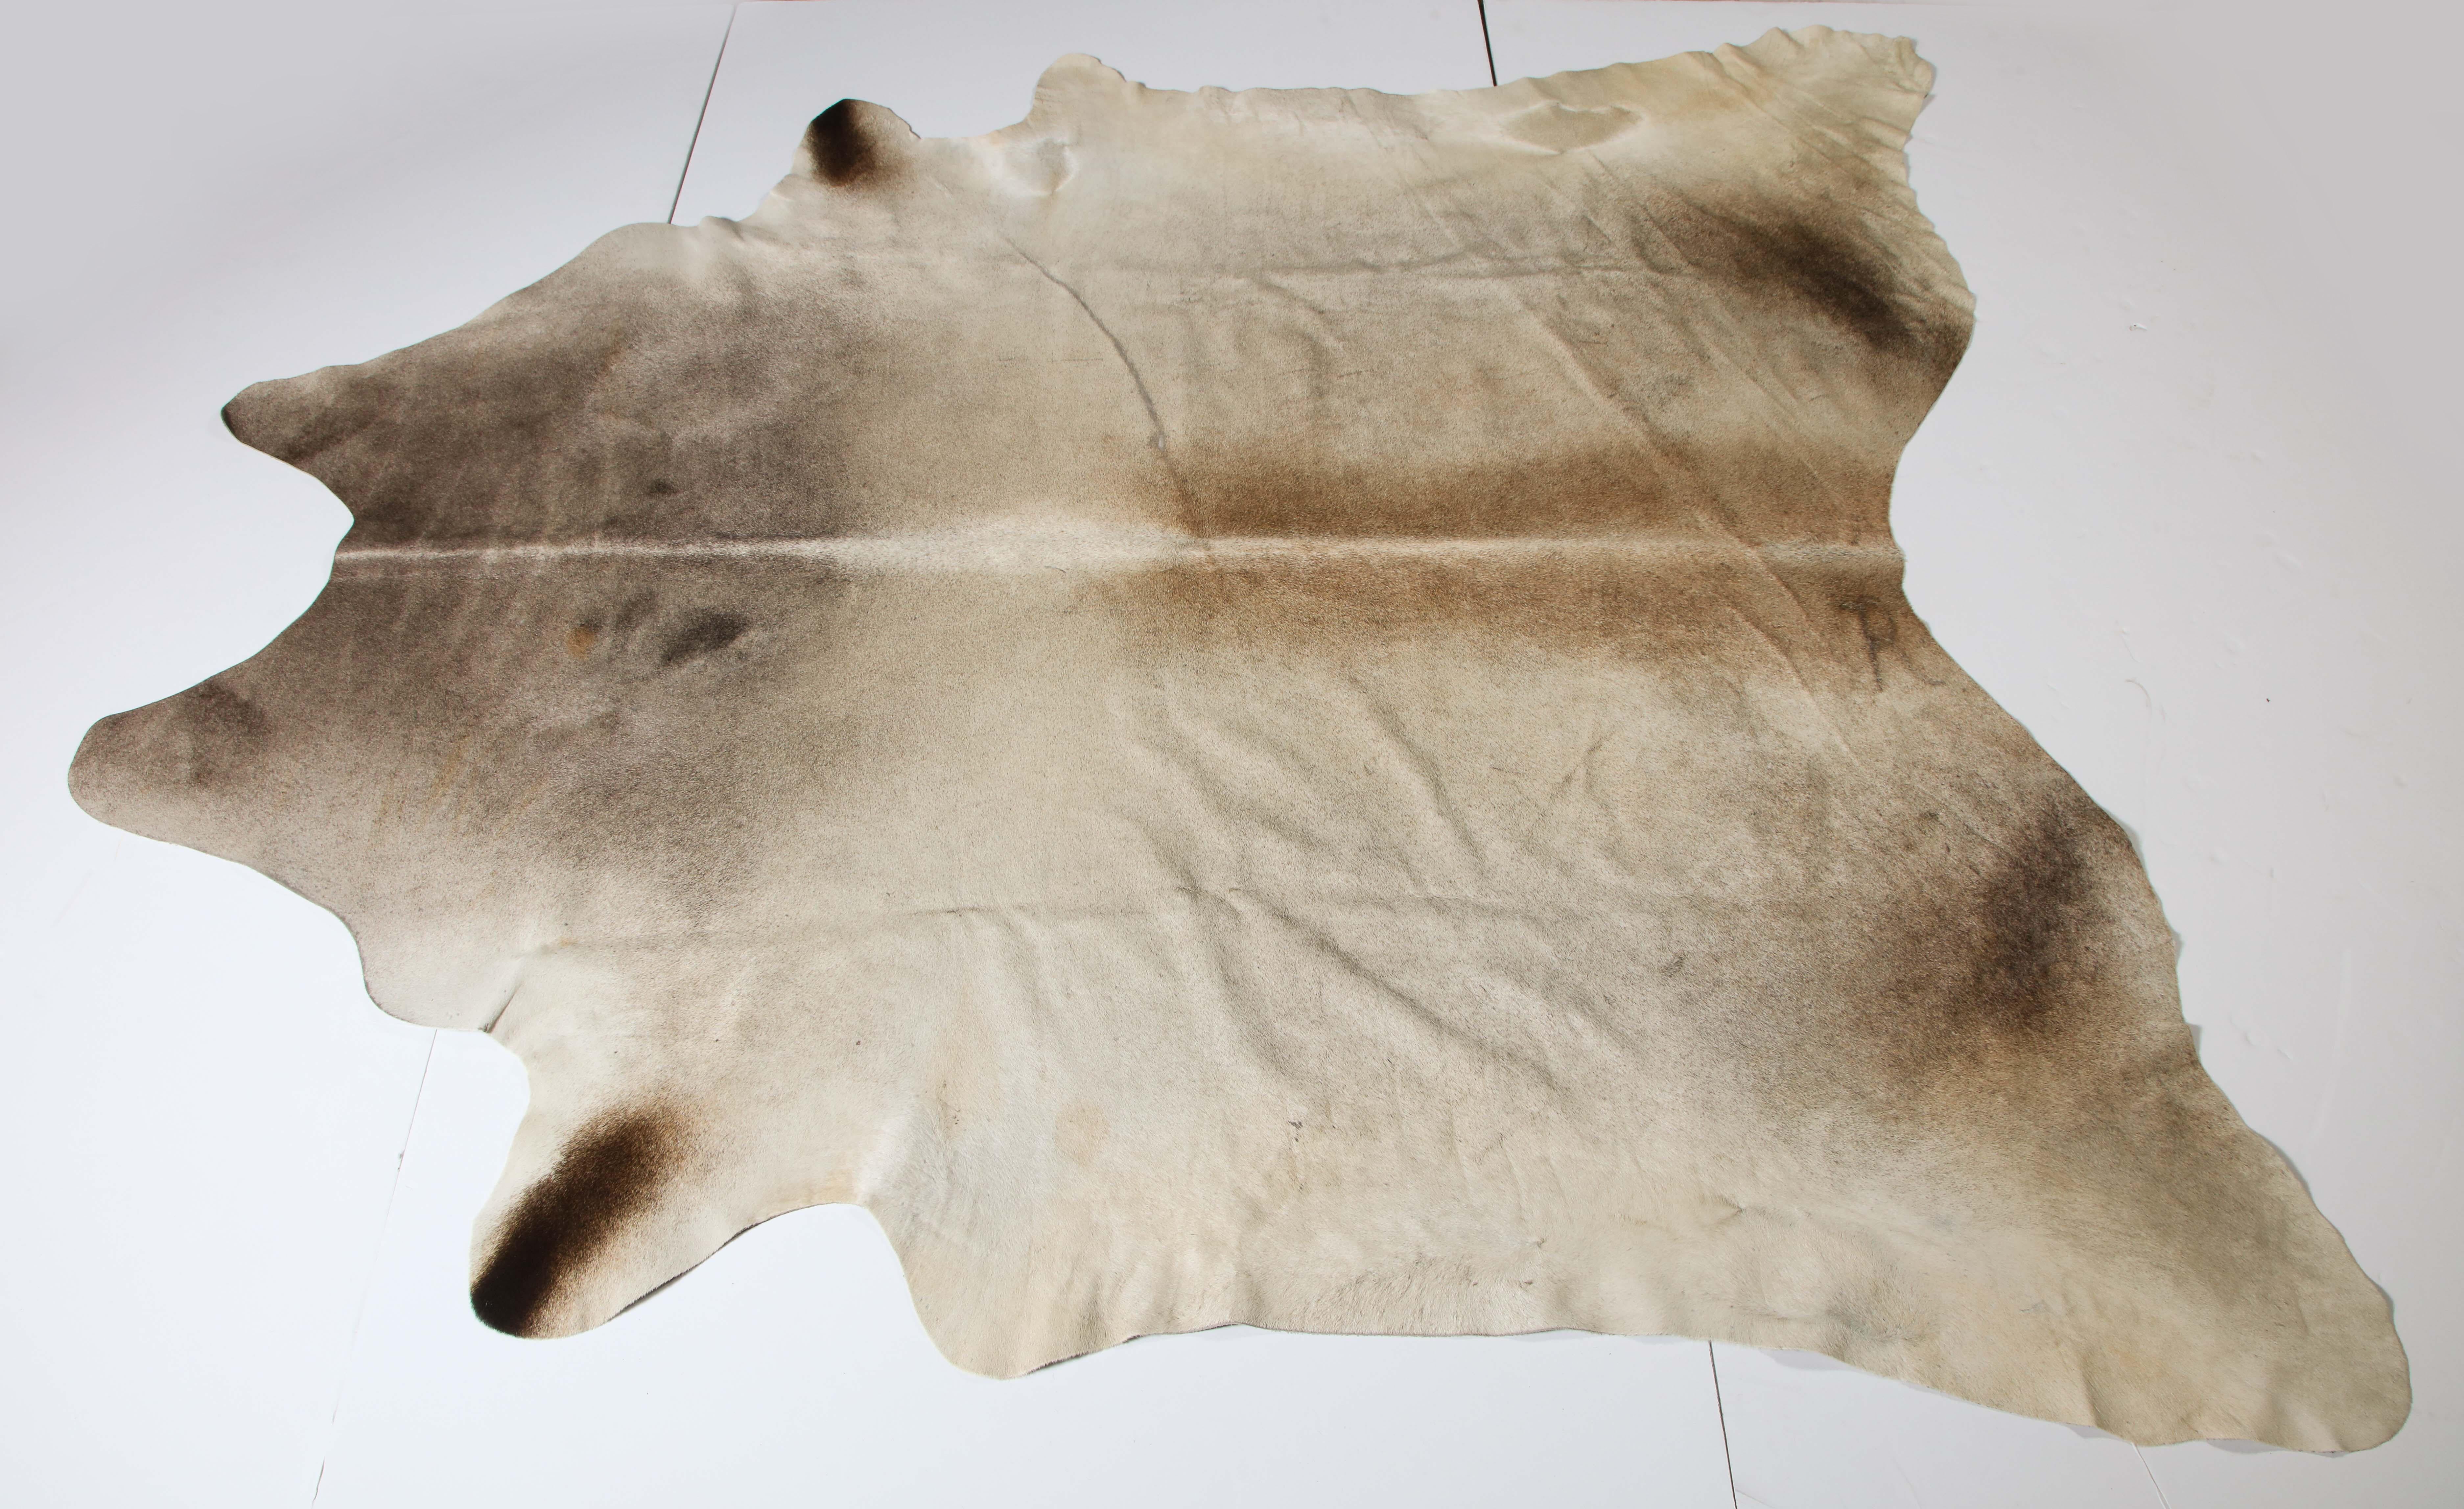 Cow hide, slightly used. 
If you measure from leg to leg, it measures 110 inches in one direction and 108 inches in the other direction.